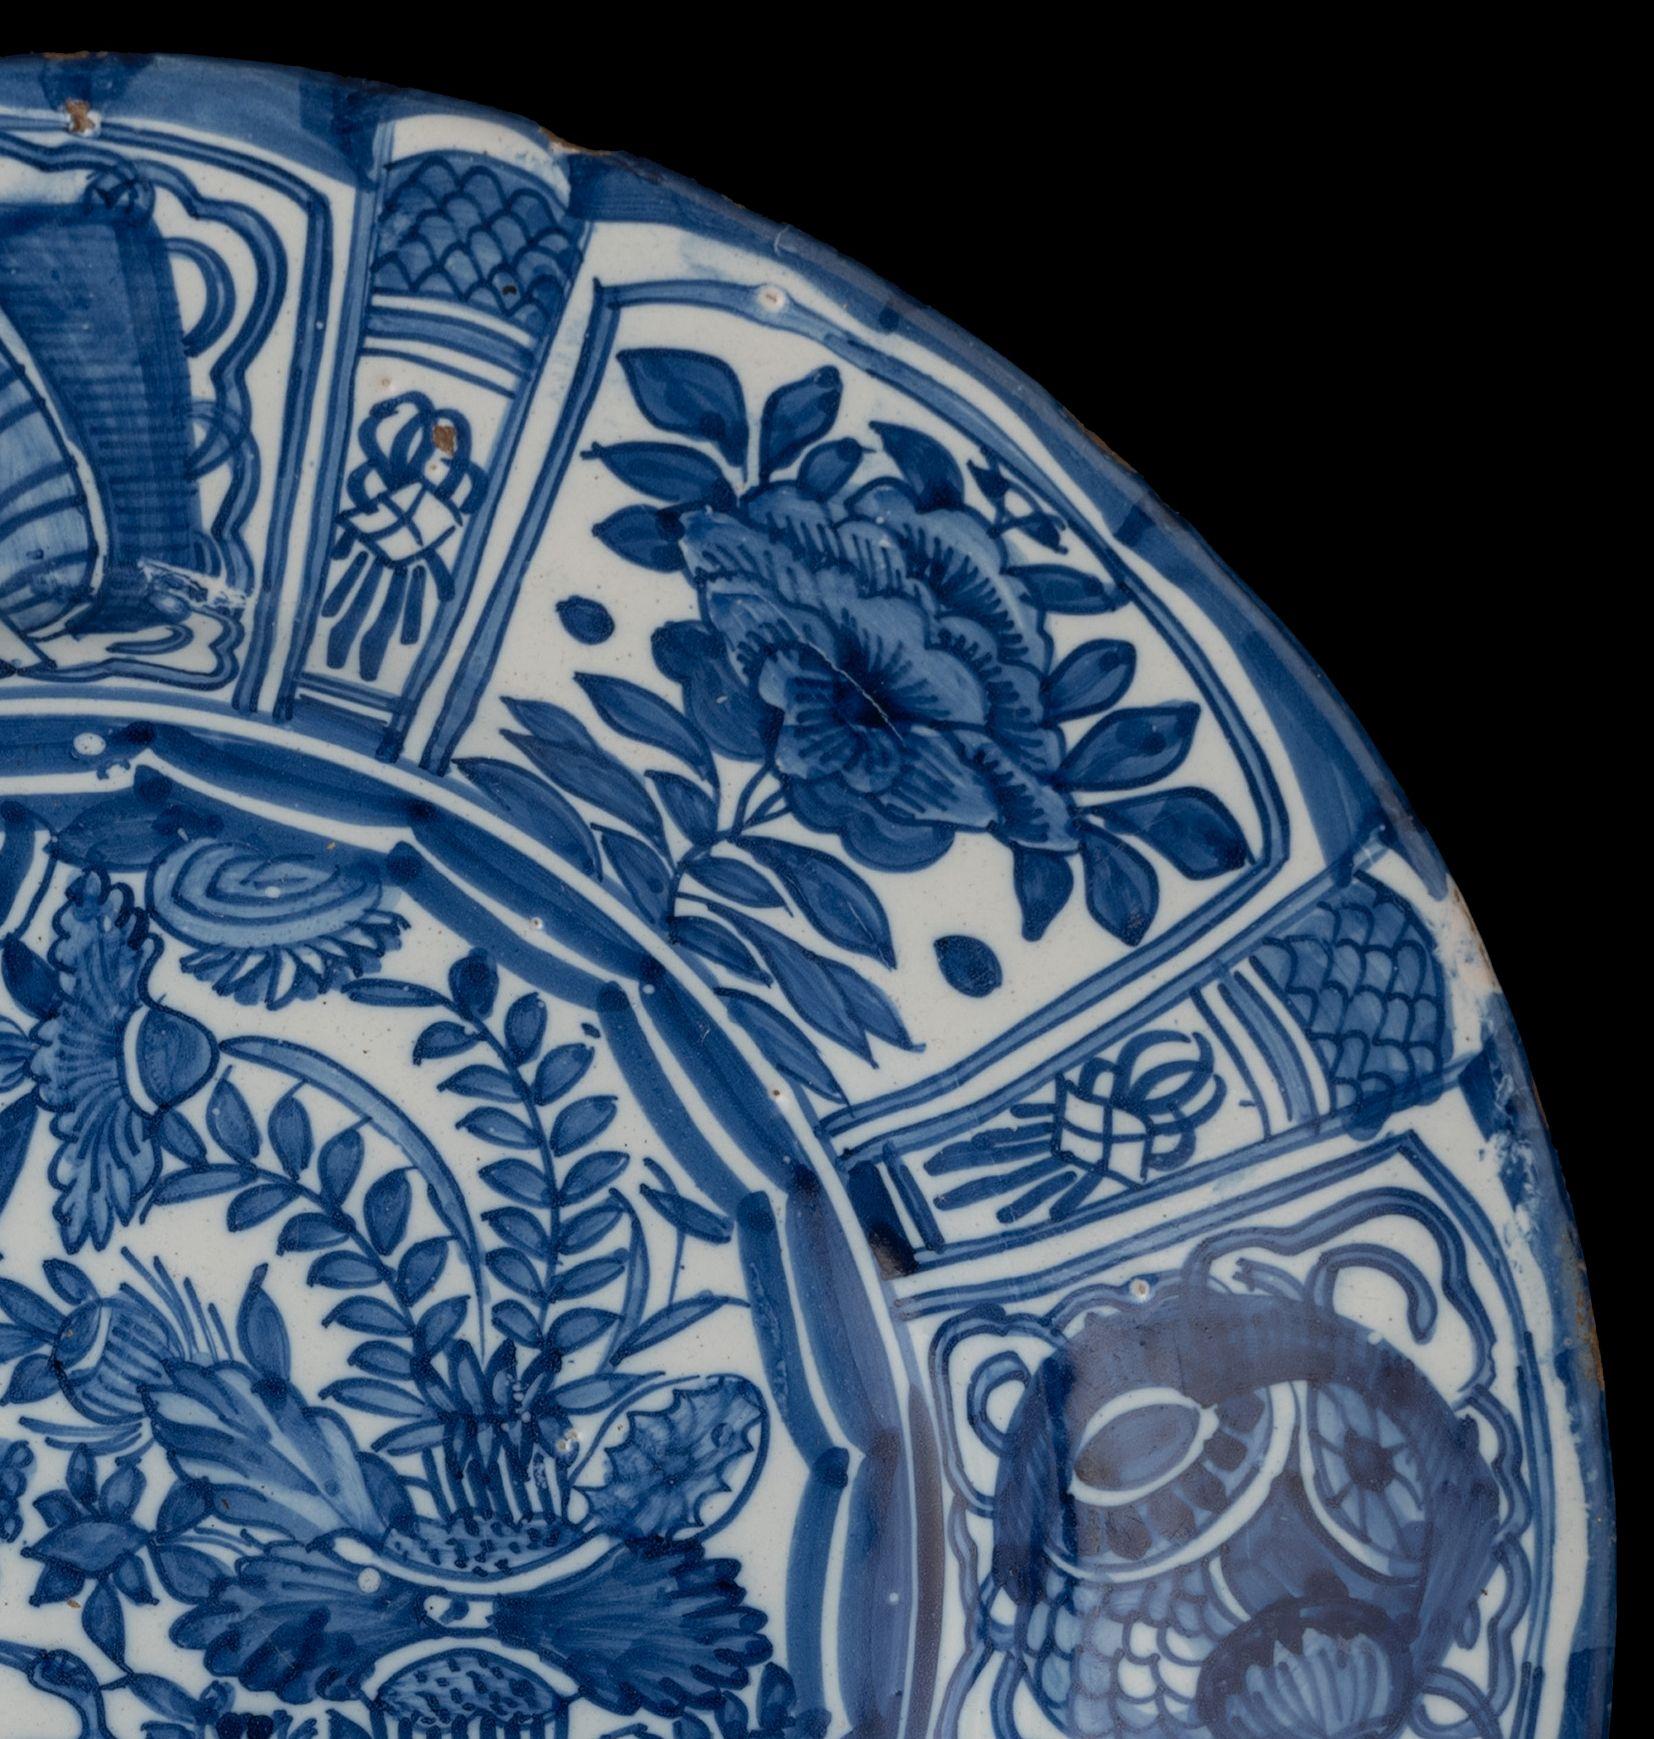 Ceramic Large blue and white chinoiserie dish Delft, 1675-1685 Chinese-style landscape For Sale